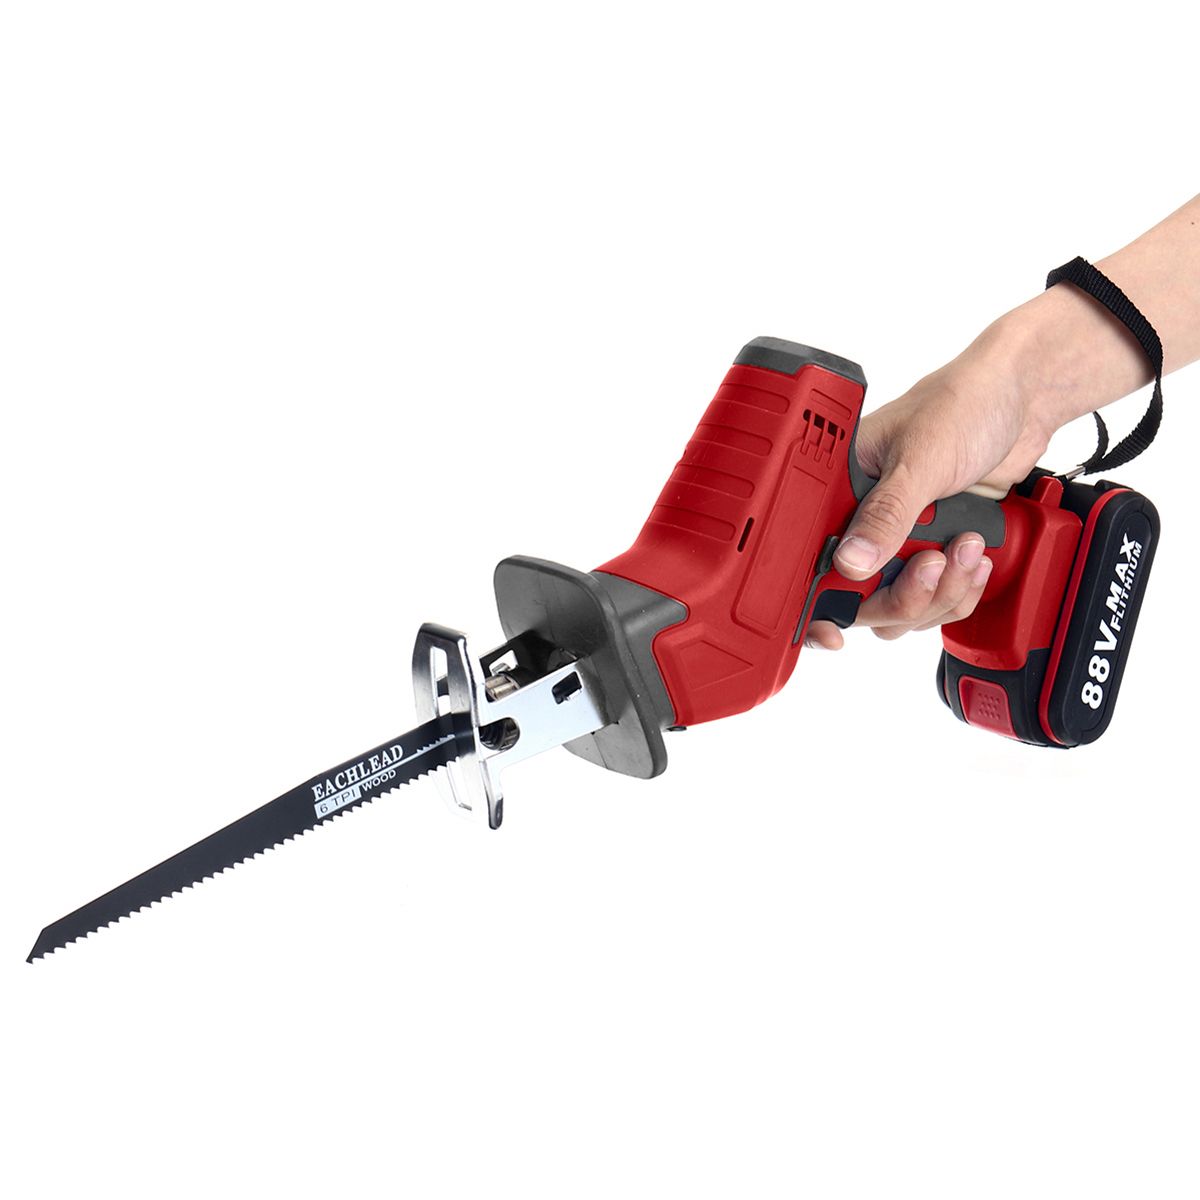 88VF-3000RPM-Rechargeable-Electric-Saw-Branches-Metal-Wood-Sawing-Cutting-Tool-1765732